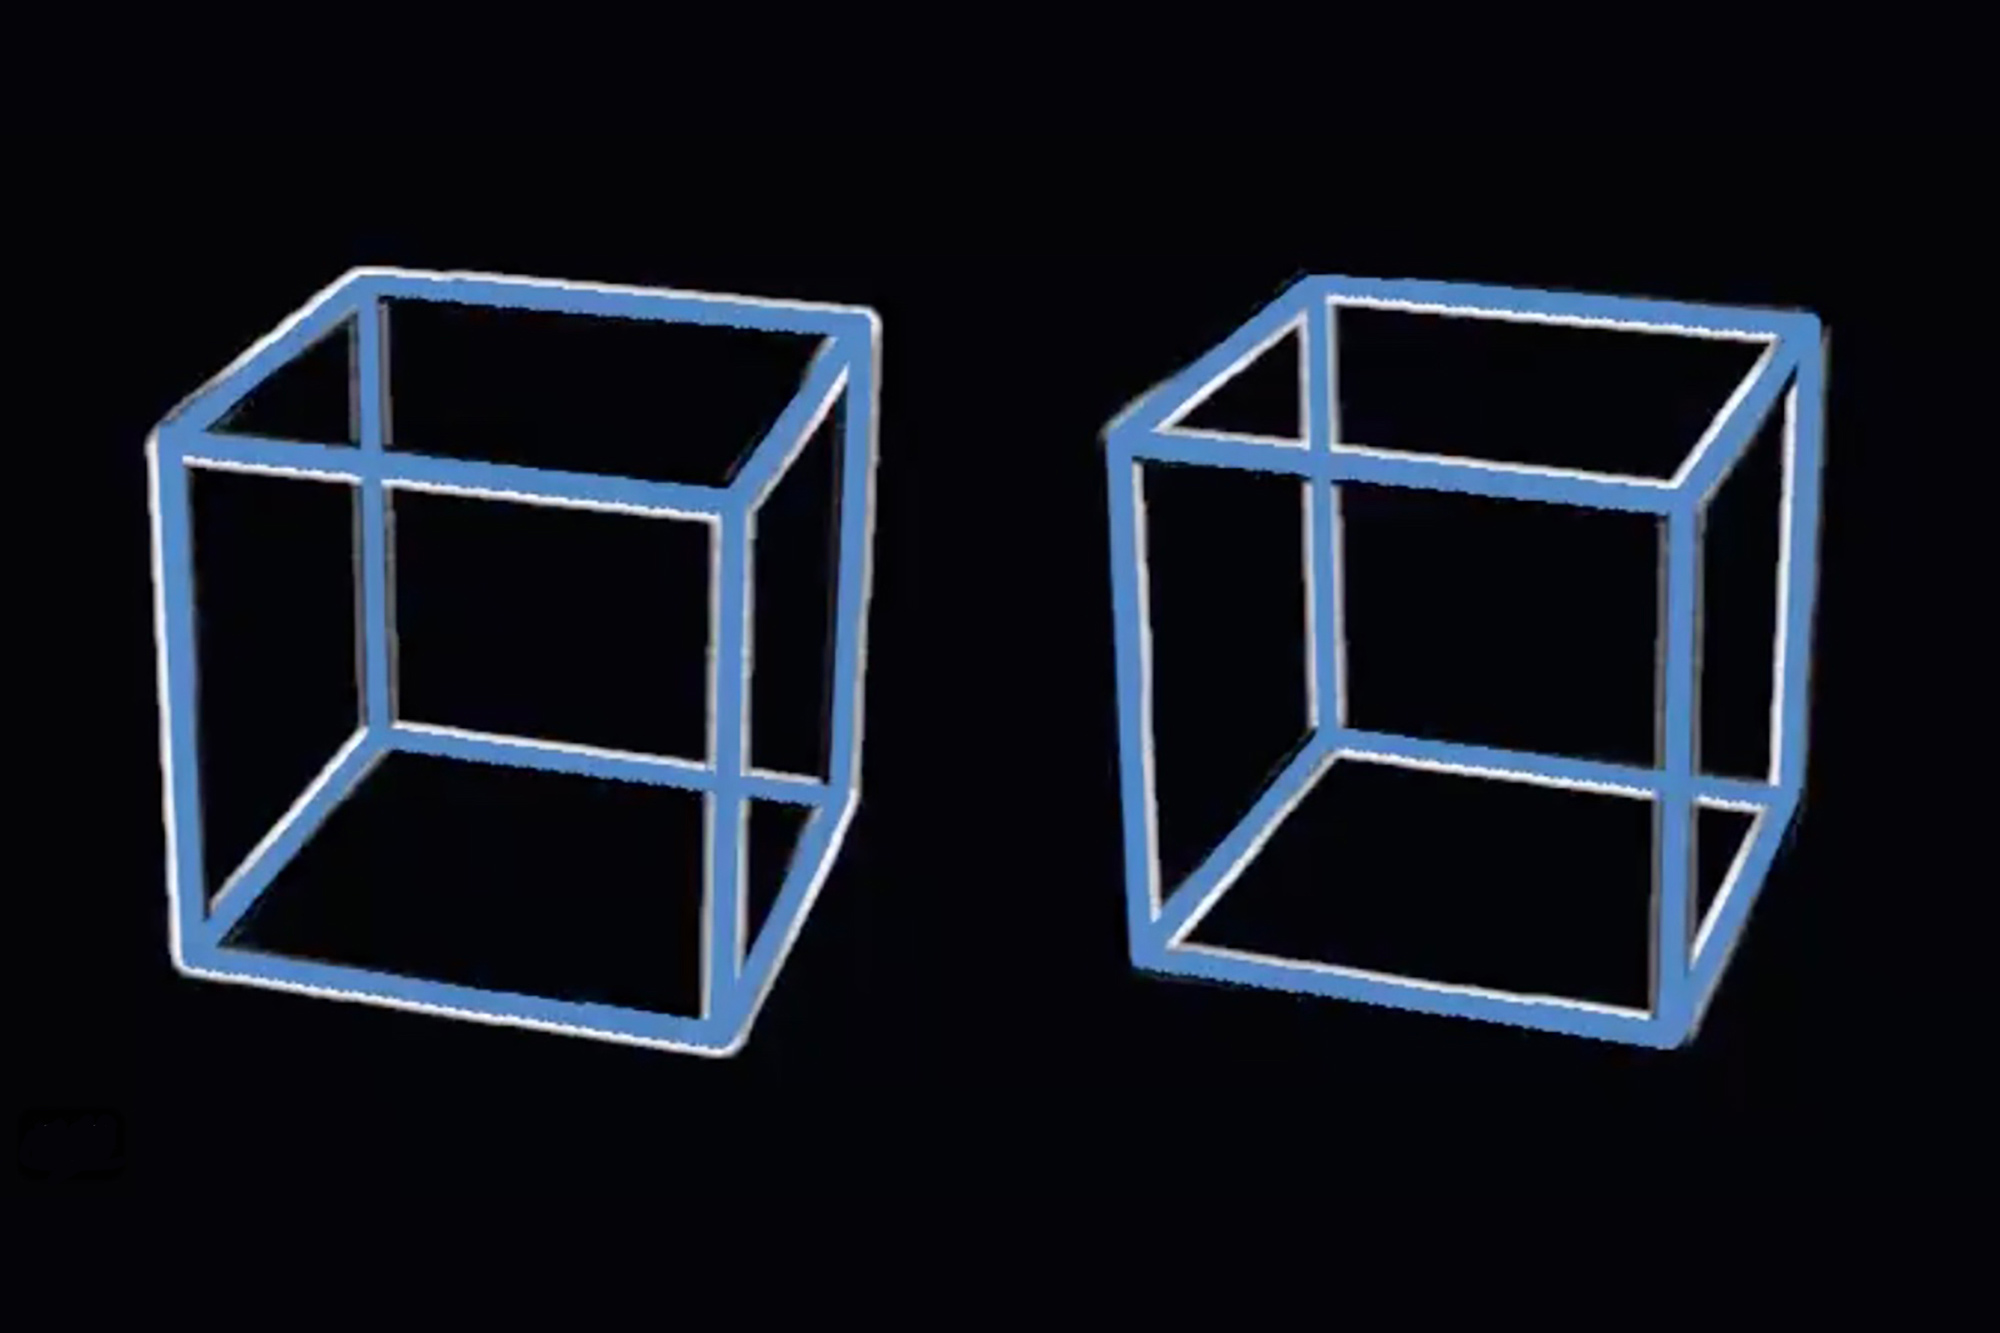 This physics-defying optical illusion appears to show cubes rotating.